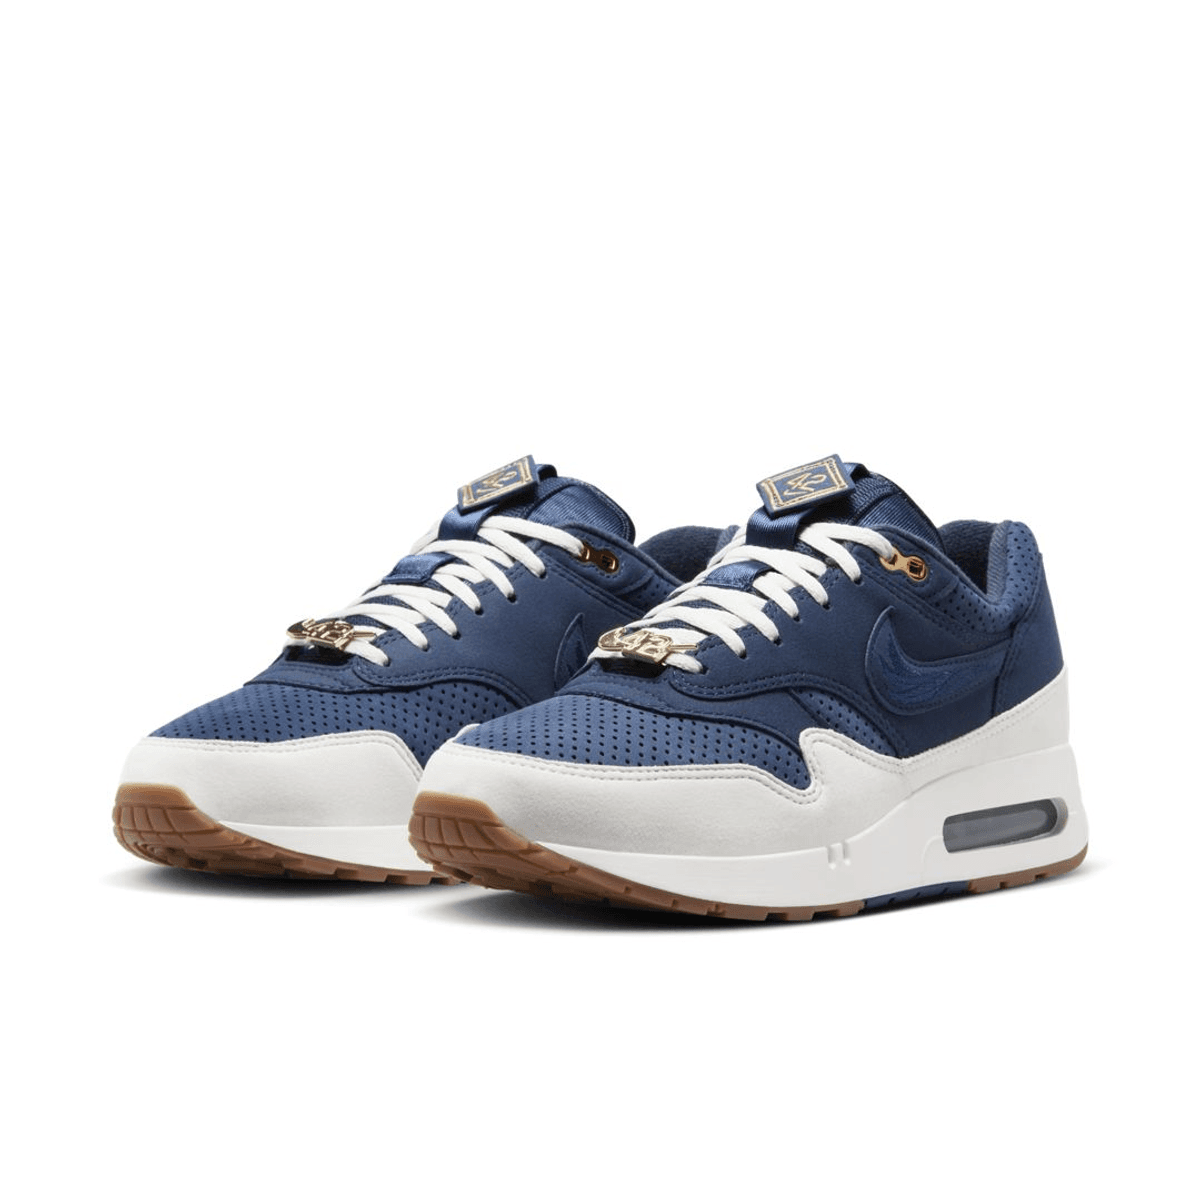 Nike Honors A Hero With The Air Max 1 ‘86 "Jackie Robinson"